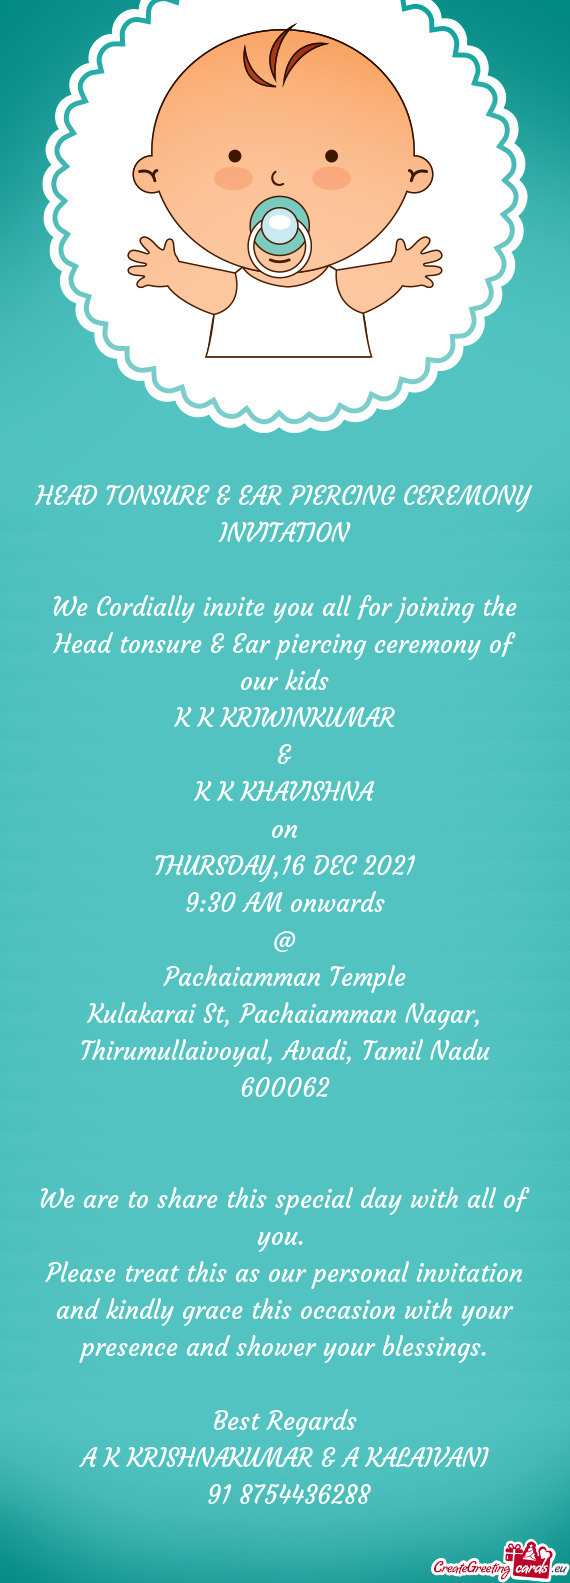 We Cordially invite you all for joining the Head tonsure & Ear piercing ceremony of our kids